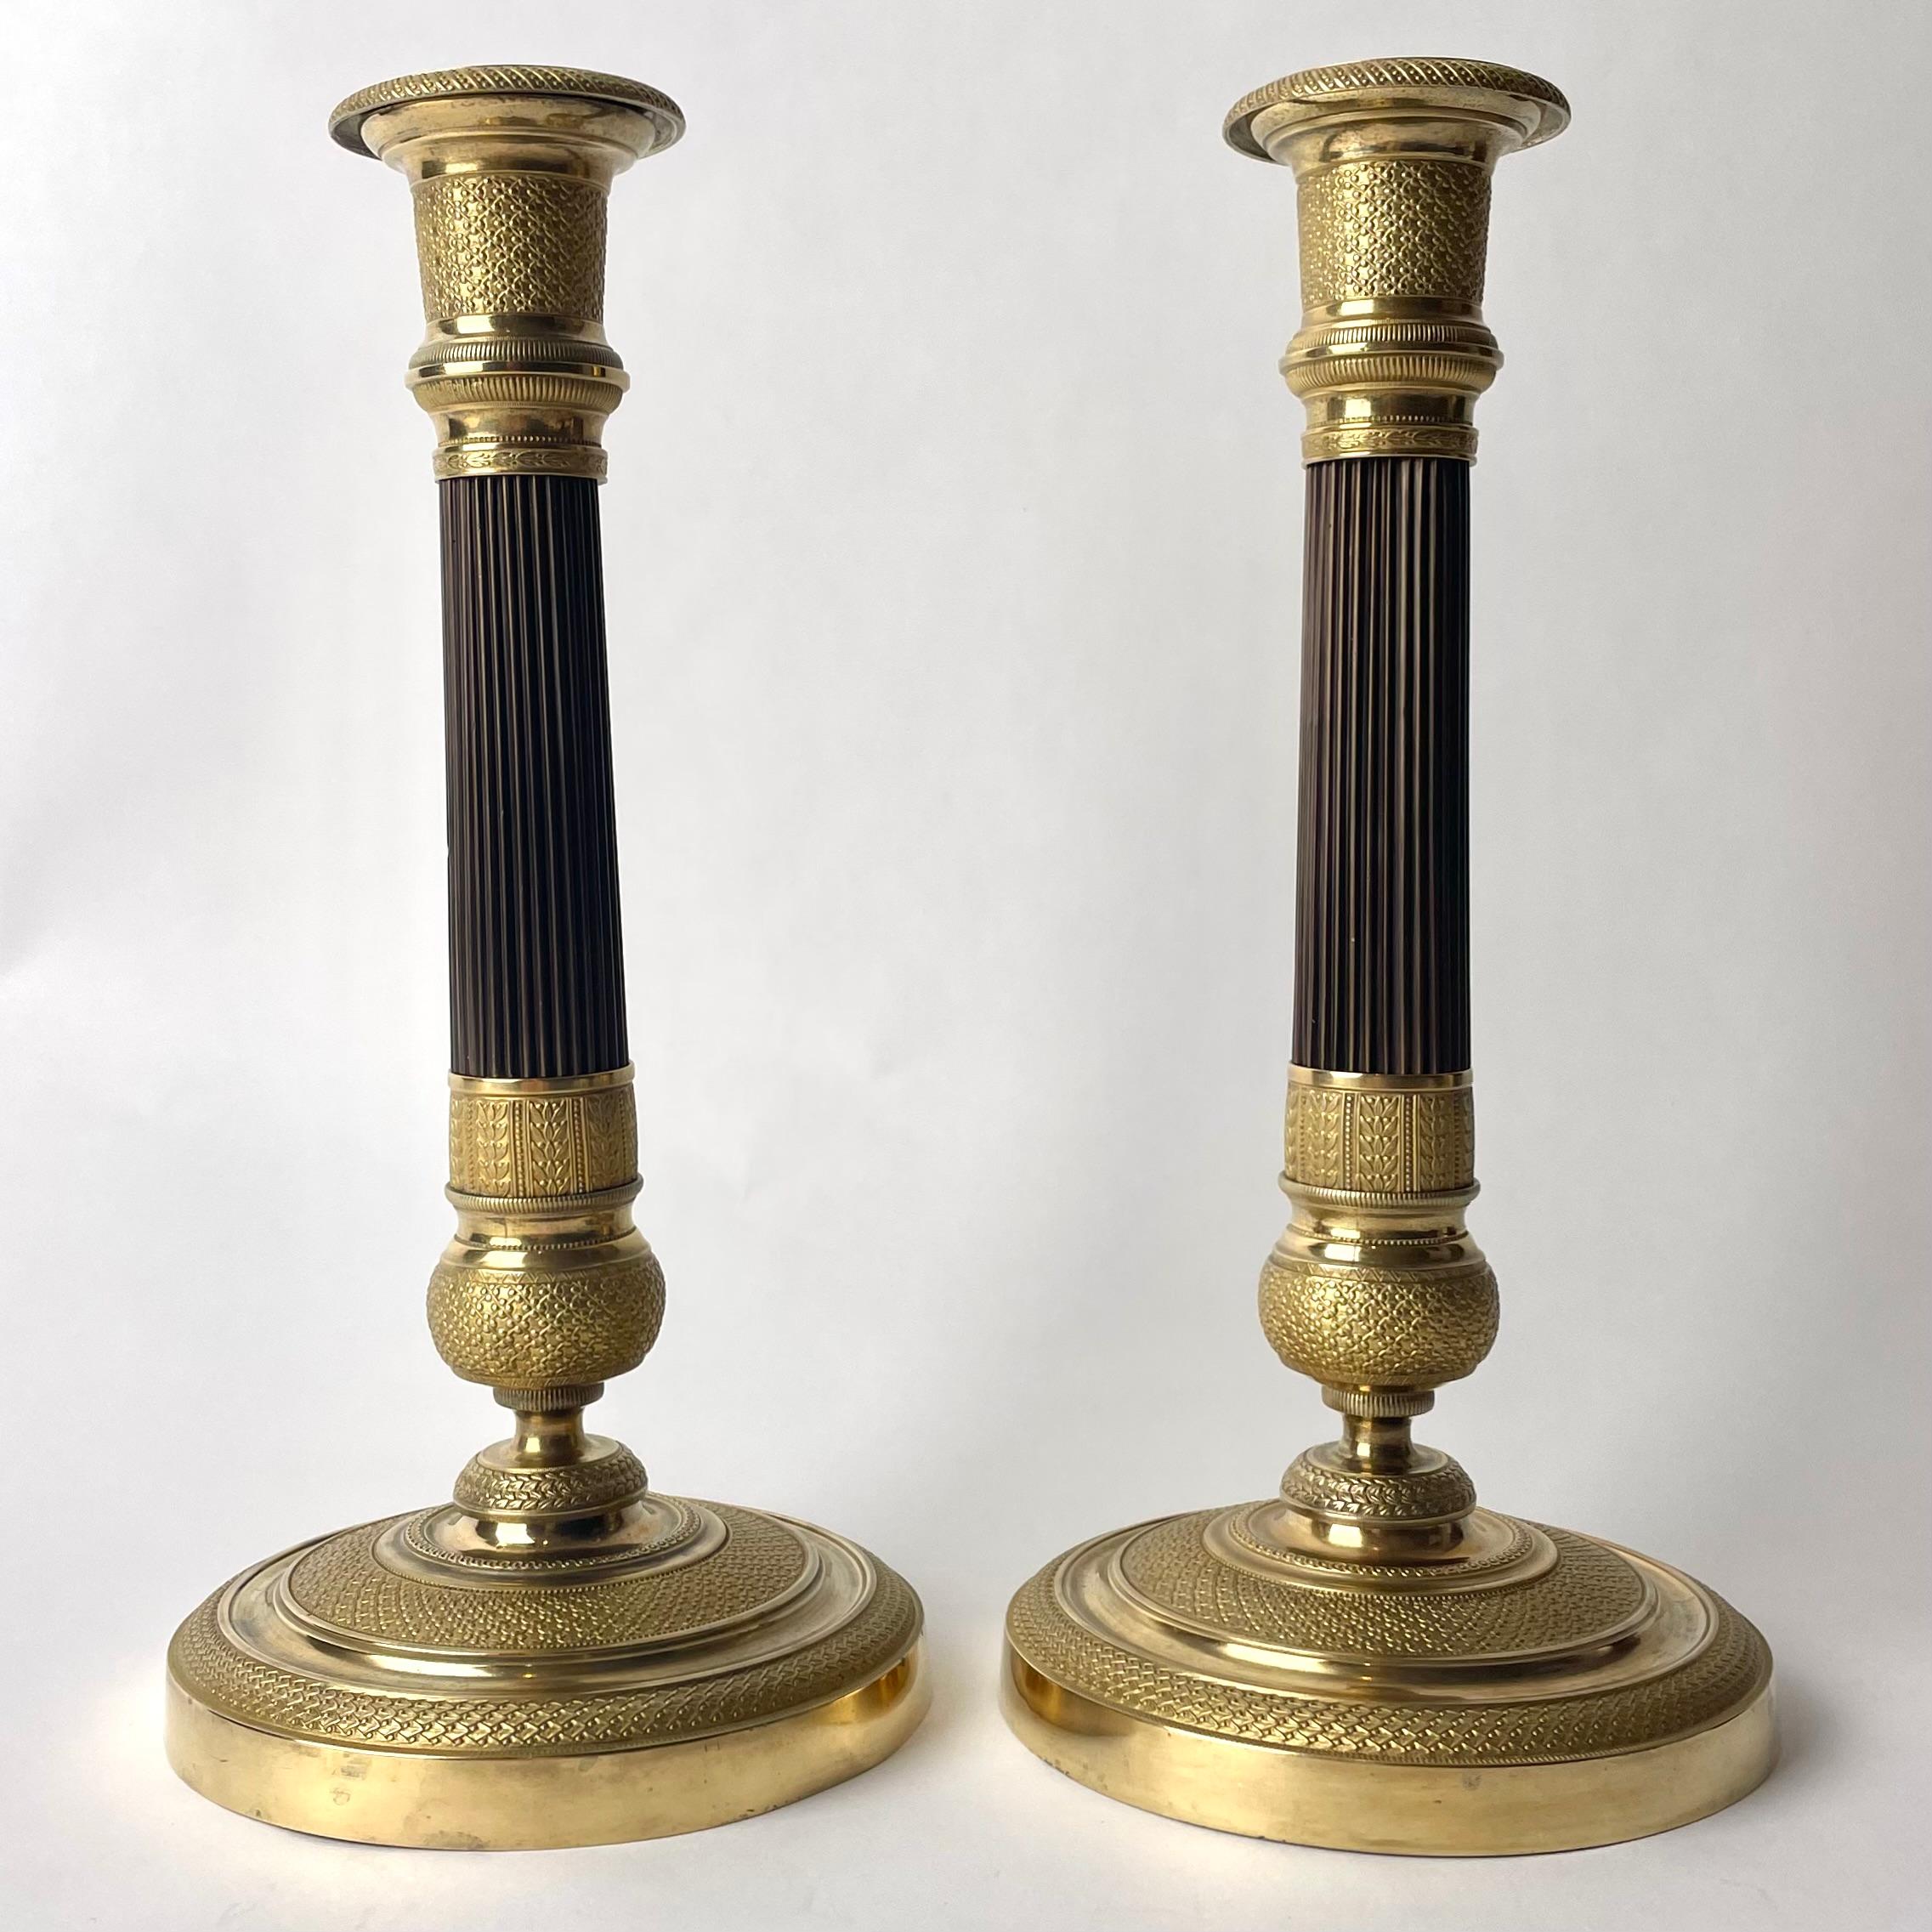 Very elegant pair of French Empire gilt and dark patinated Bronze Candlesticks. Probably made in Paris during the 1820s. Richly decorated in period Empire and with a dark patinated column.


Wear consistent with age and use 